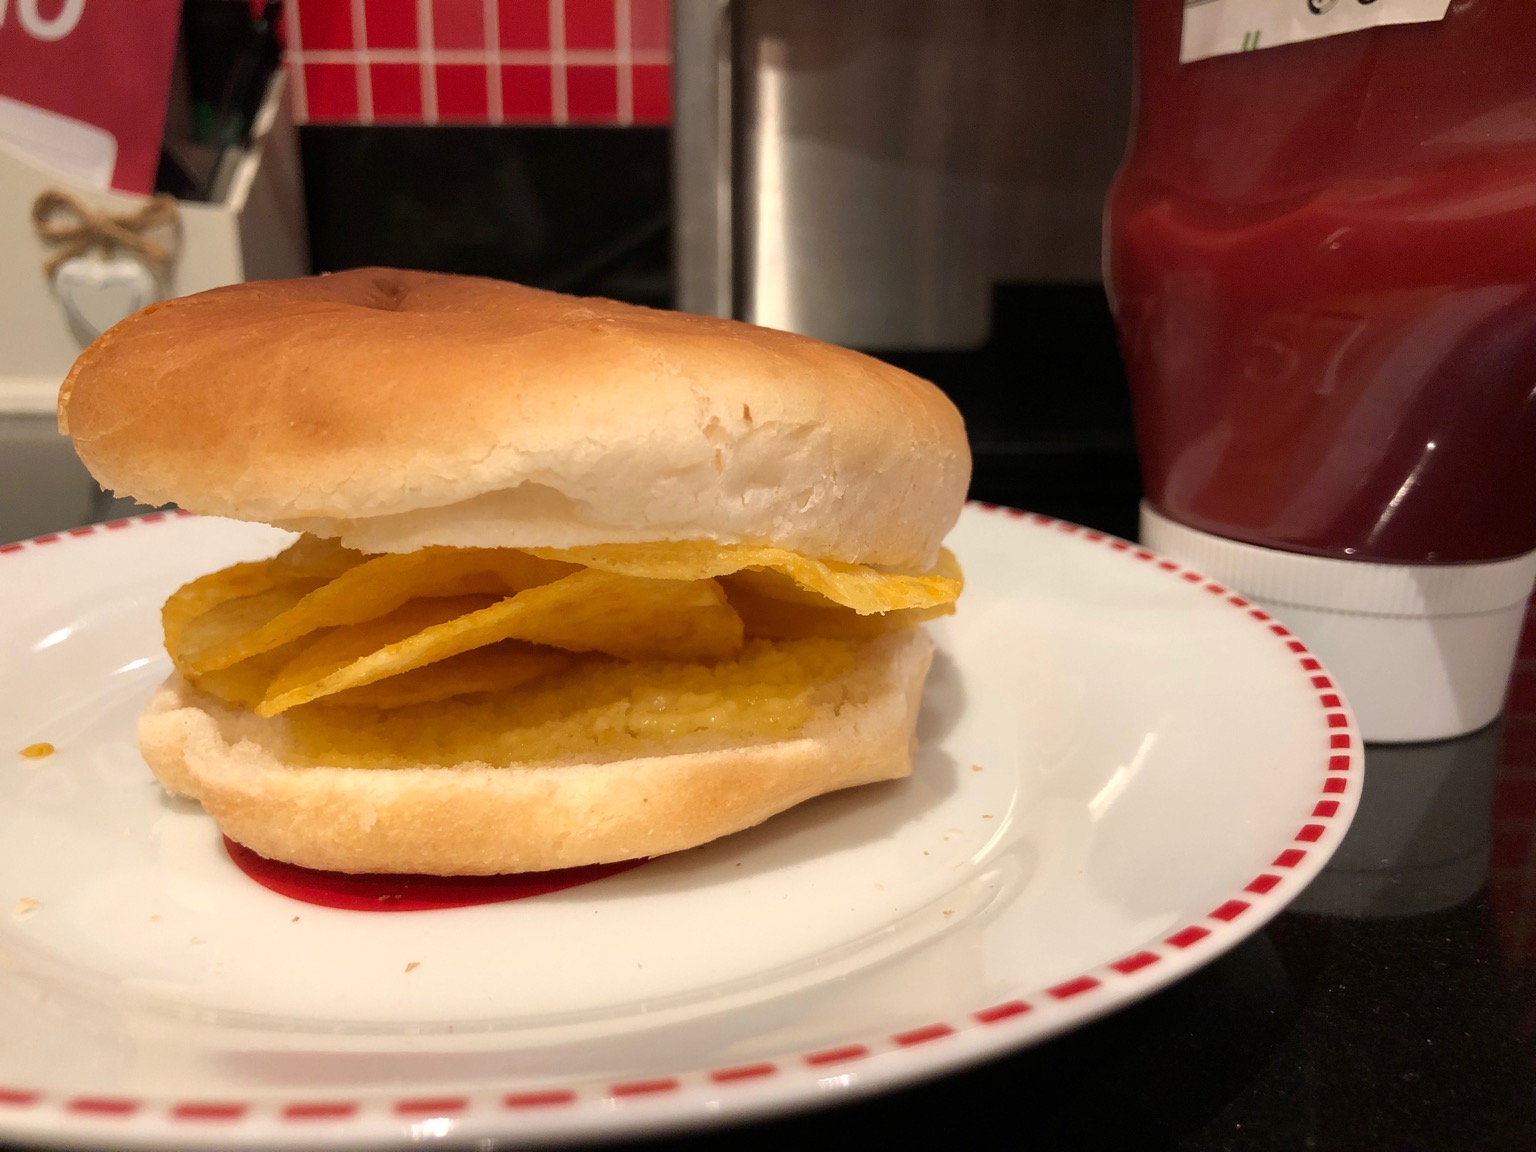 Buttered white roll containing potato crisps